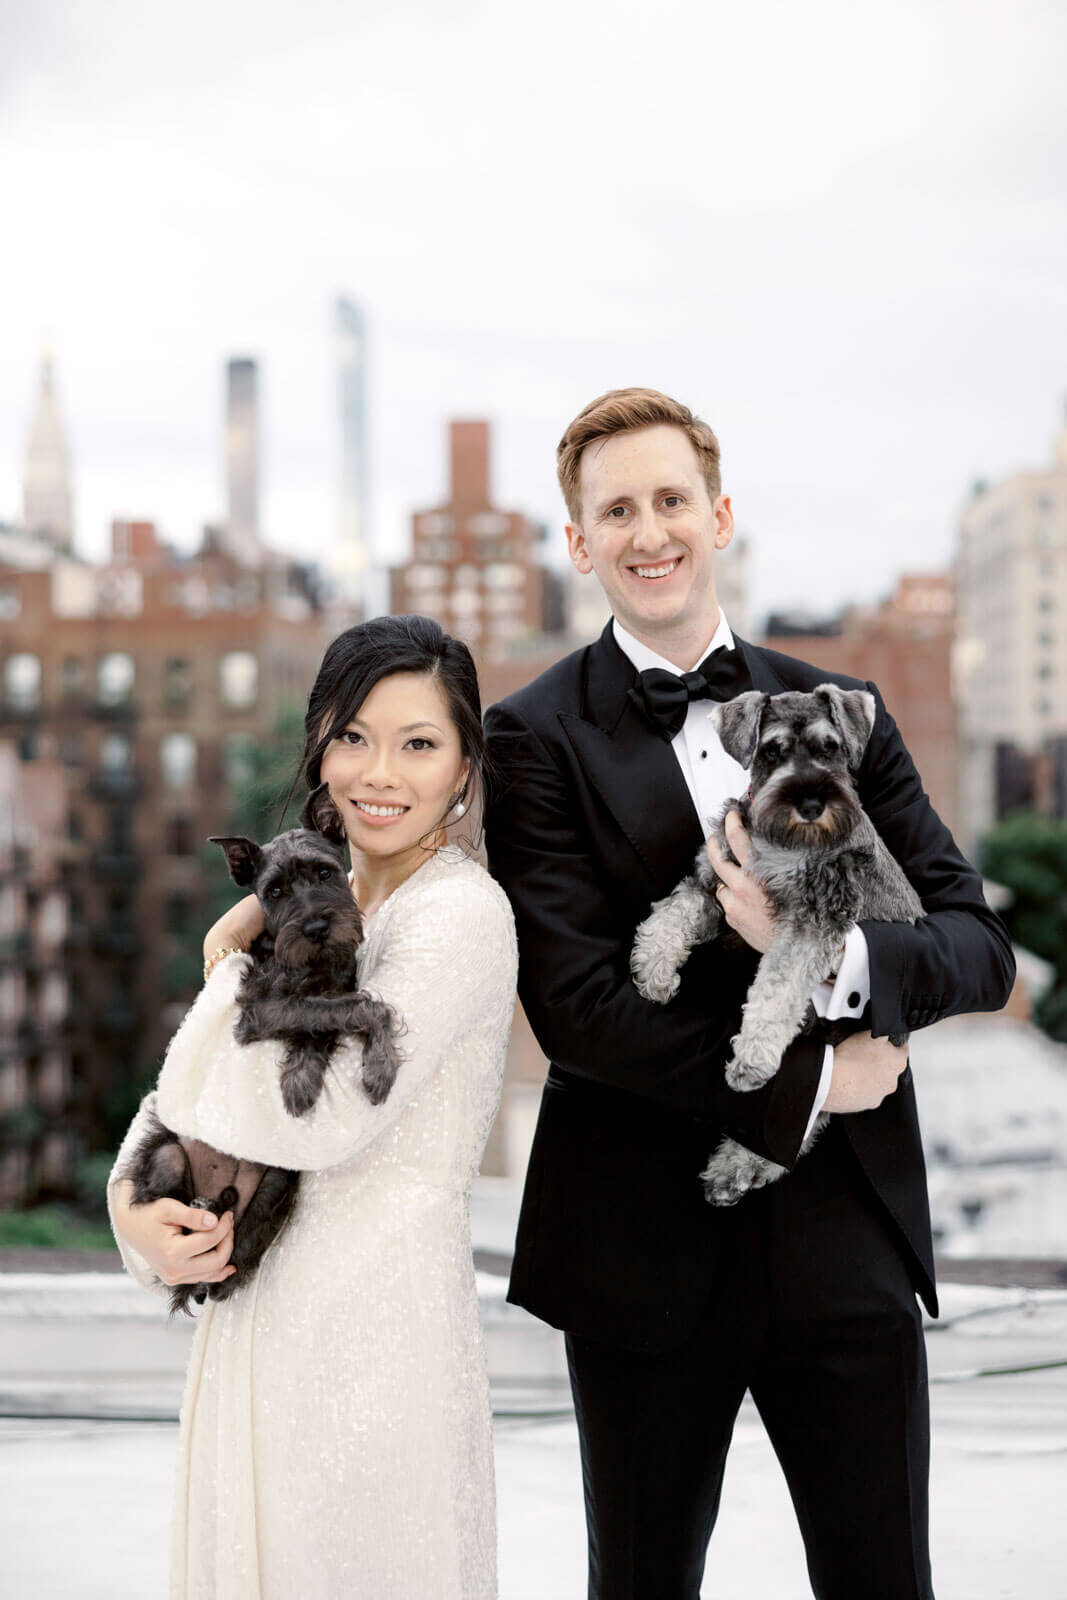 Close-up shot of the bride and groom carrying their dogs on a rooftop, in NYC. Image by Jenny Fu